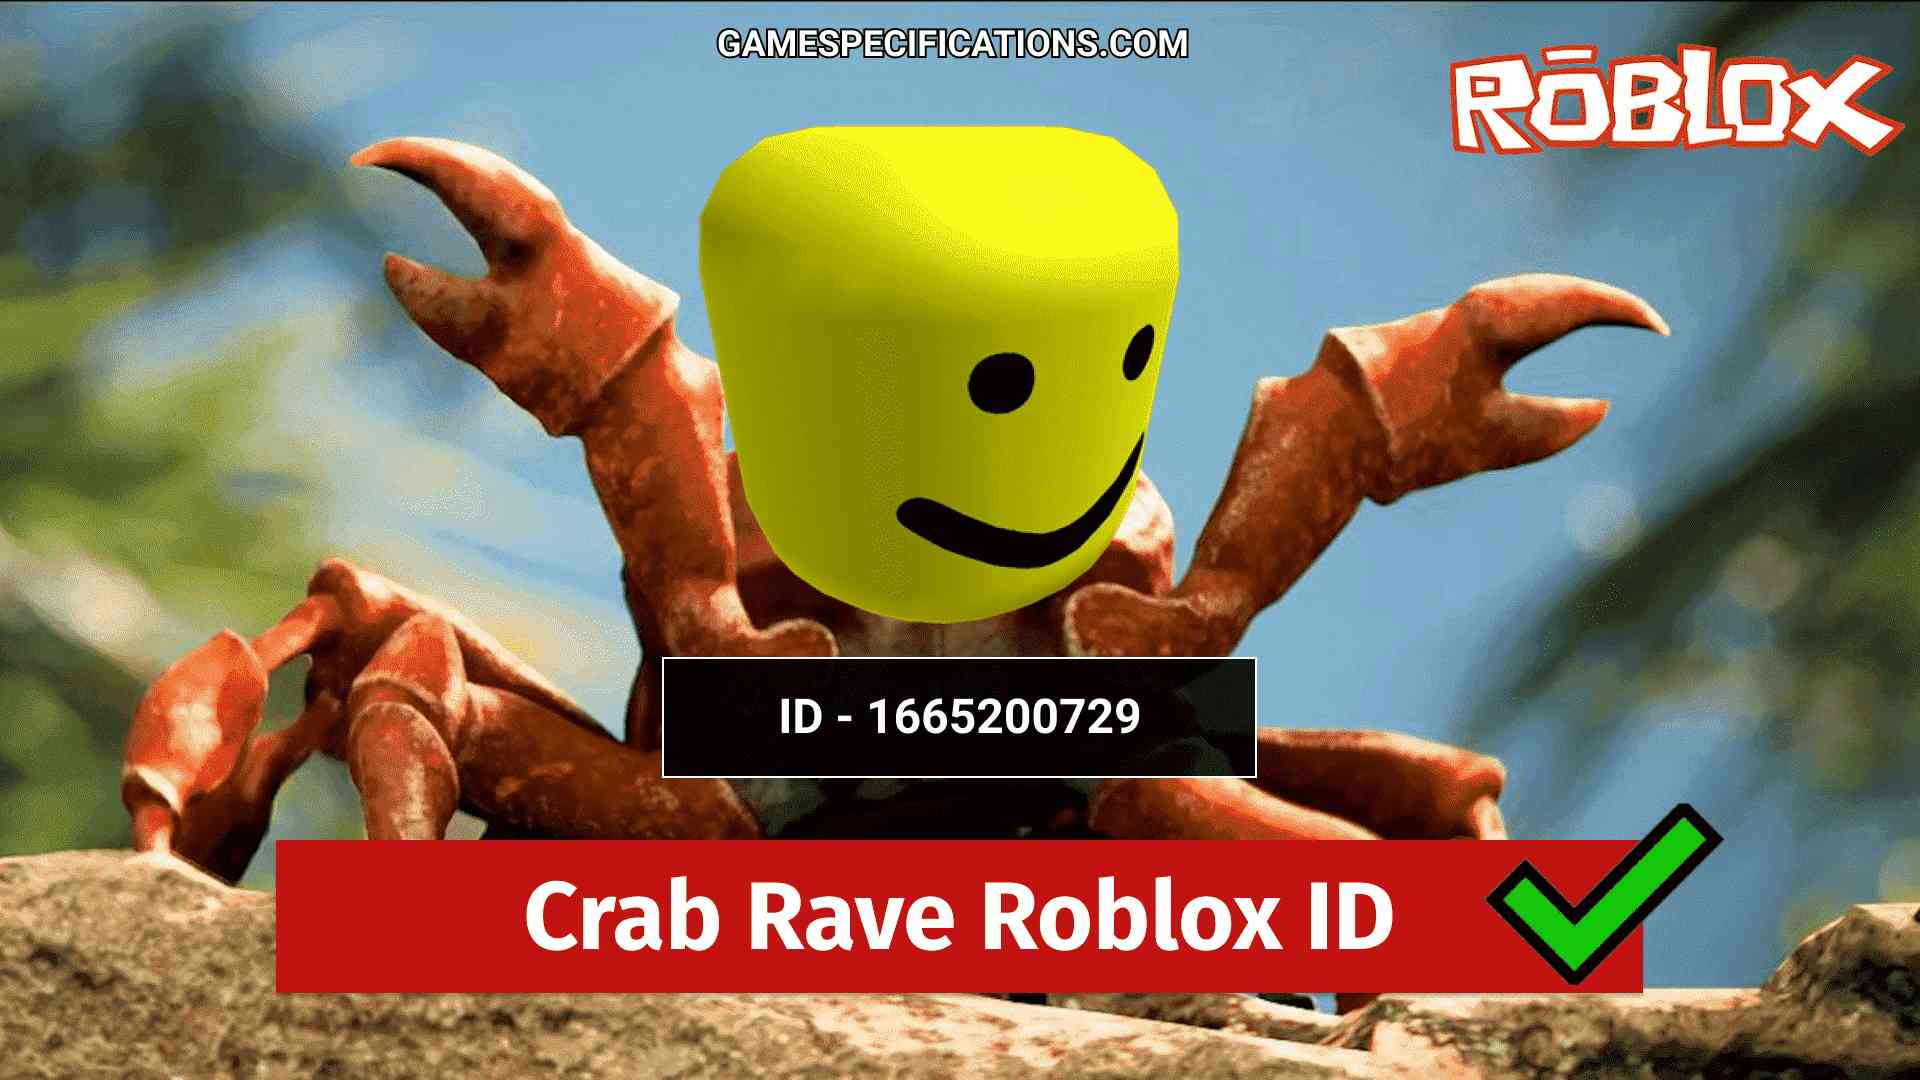 10 Best Crab Rave Roblox Id Codes Parody Remix Included Game Specifications - roblox megalovania remix song id